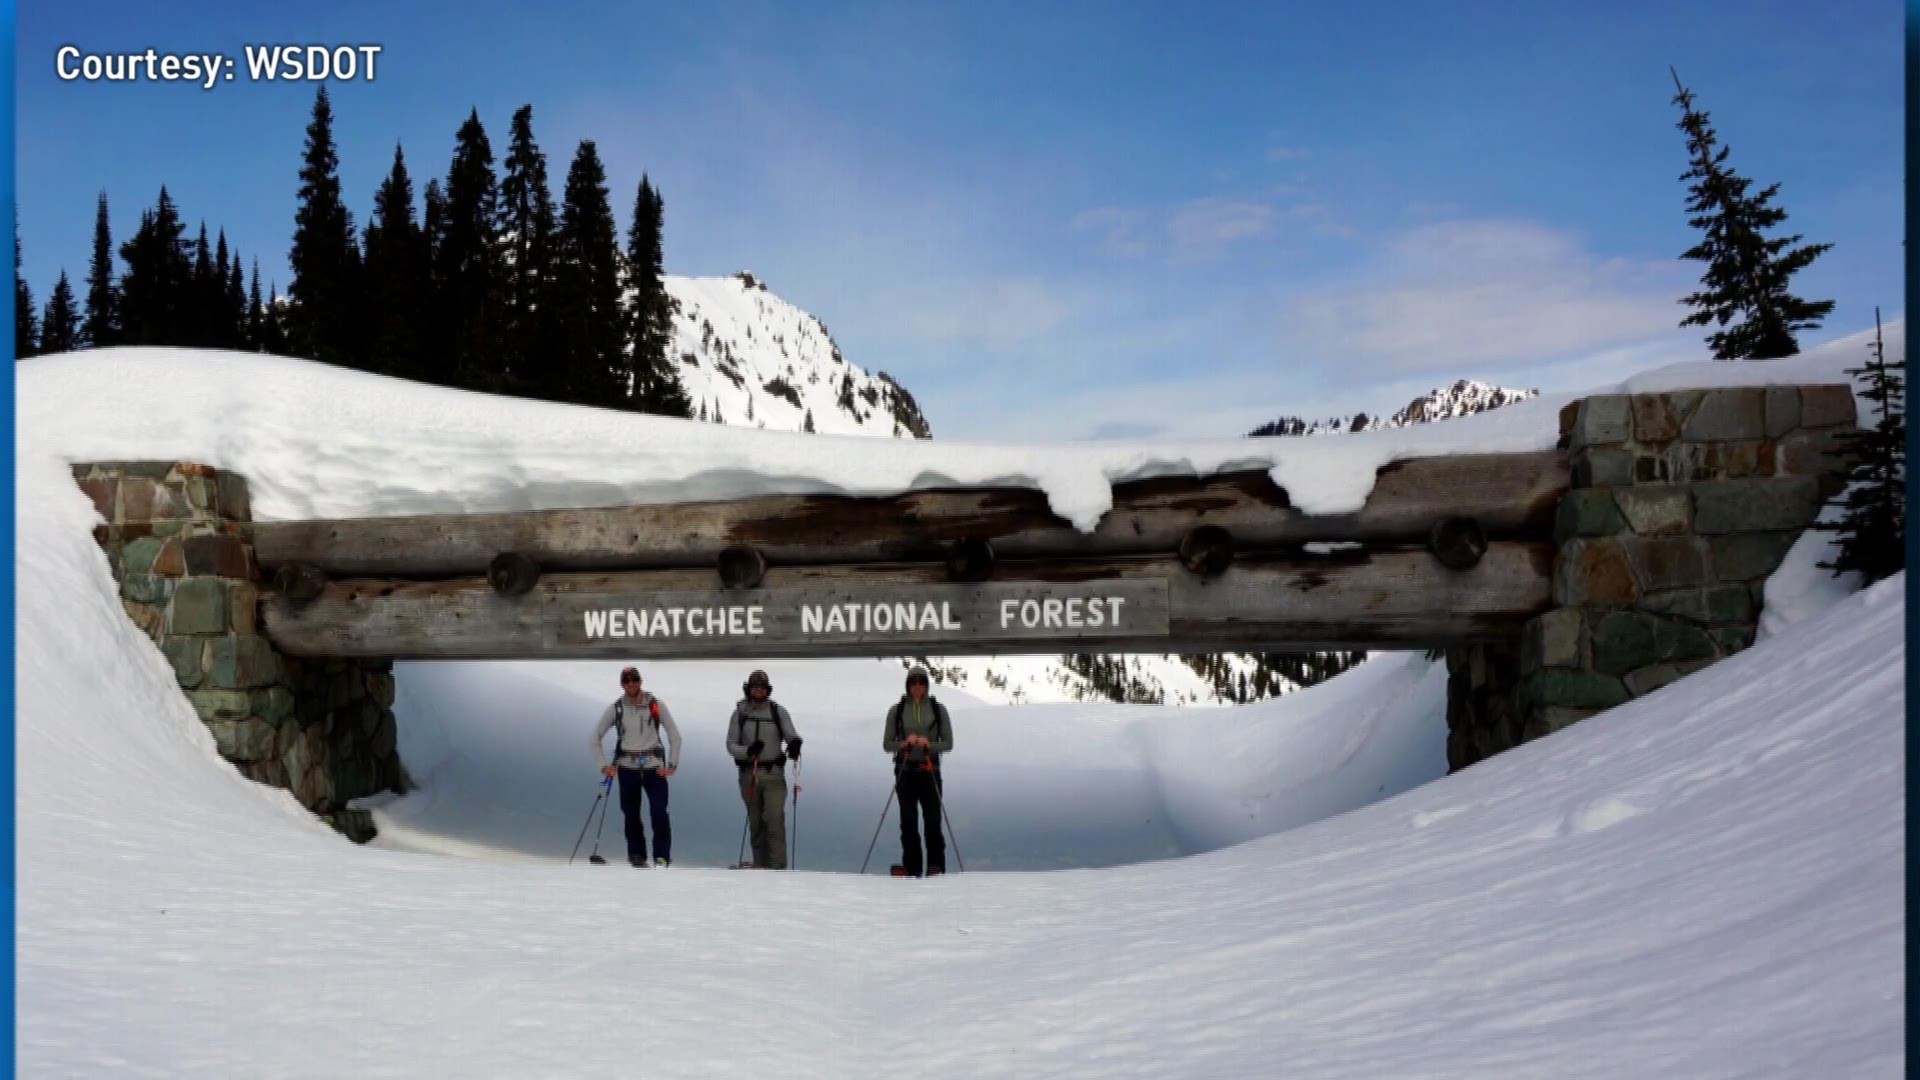 WSDOT will reopen Chinook and Cayuse passes on May 23, 2019